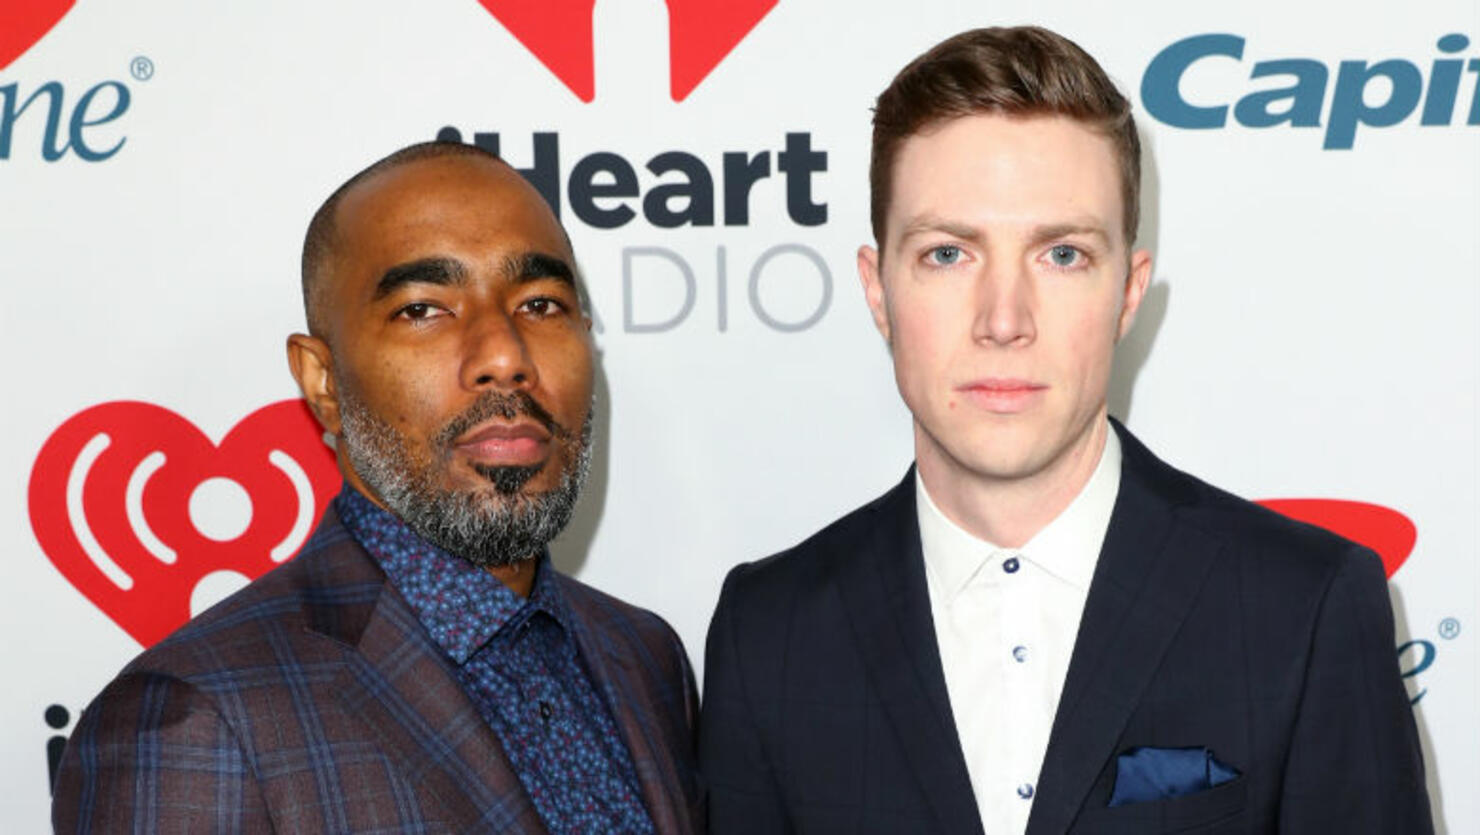 iHeartRadio Podcast Icon Awards Recipients Revealed iHeart